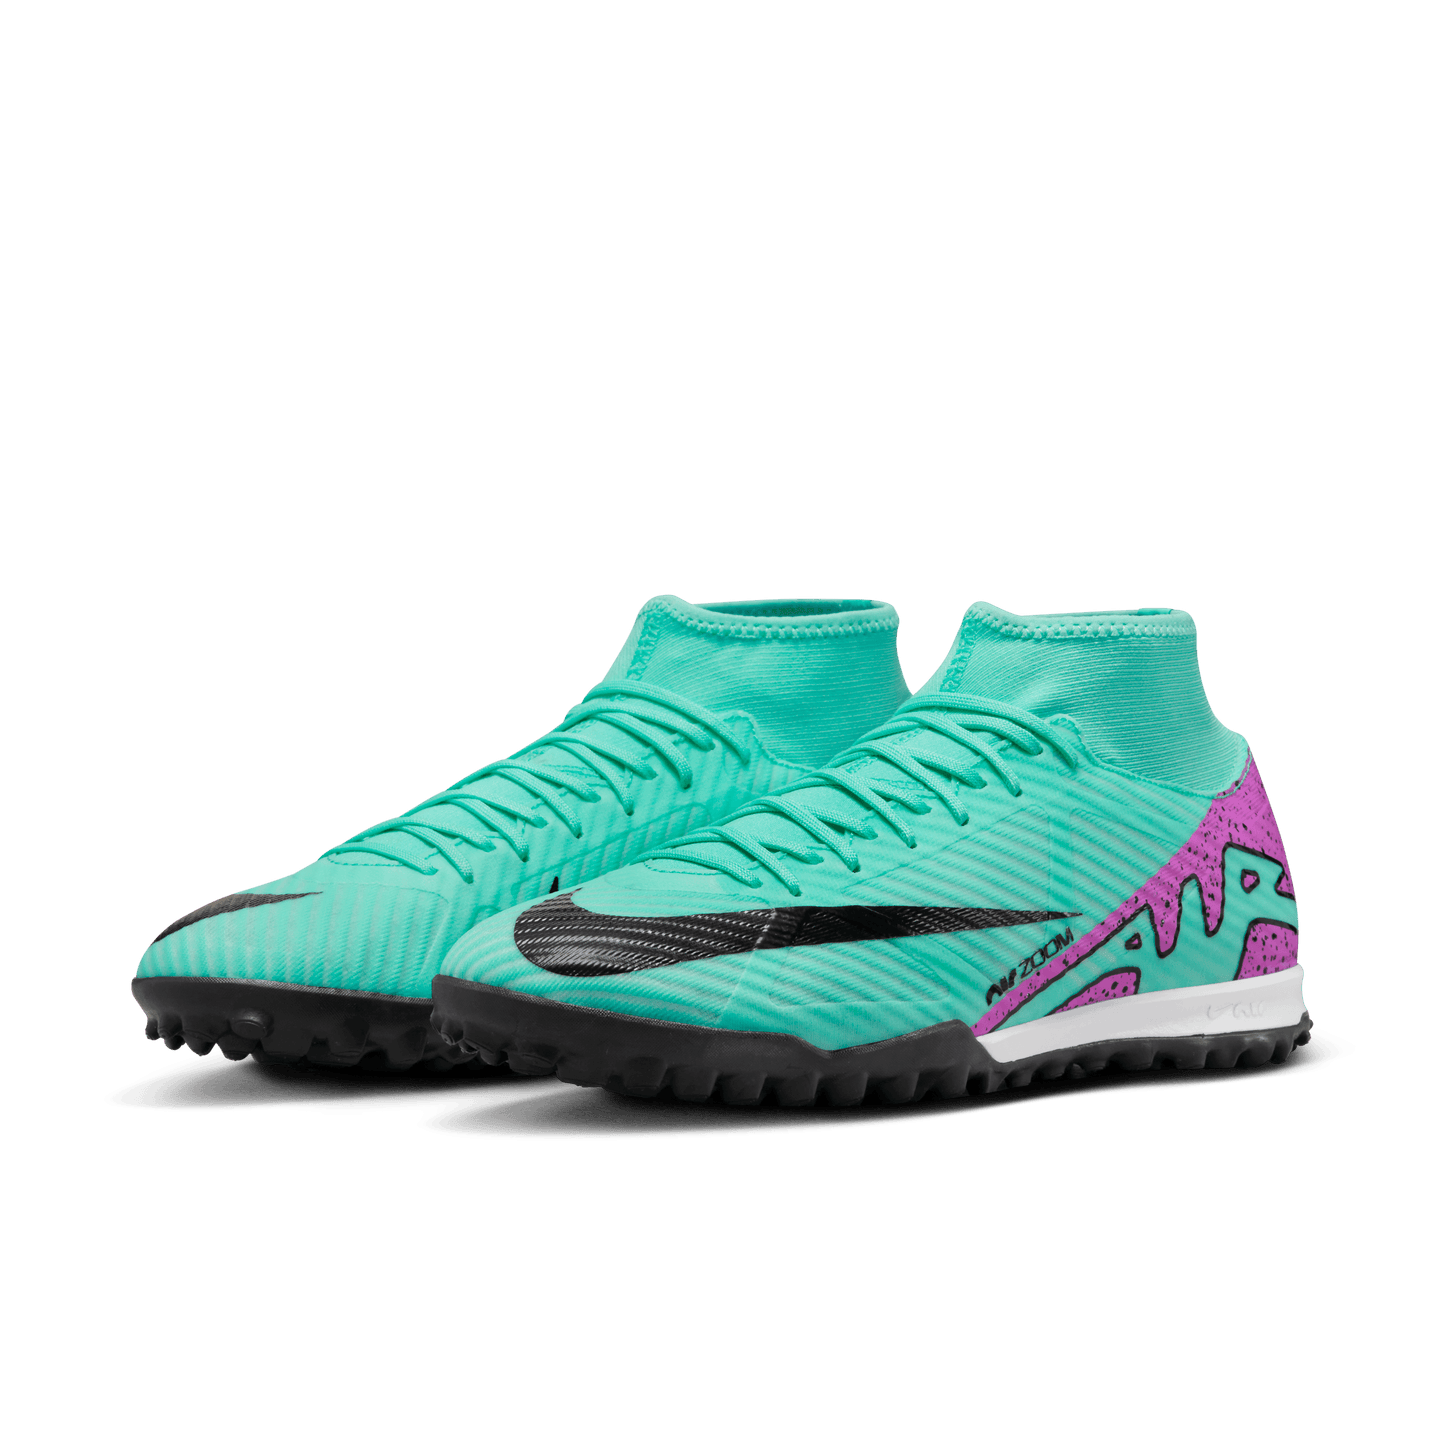 Nike Mercurial Superfly 9 Academy Turf Soccer Shoes Hyper Turquoise Purple